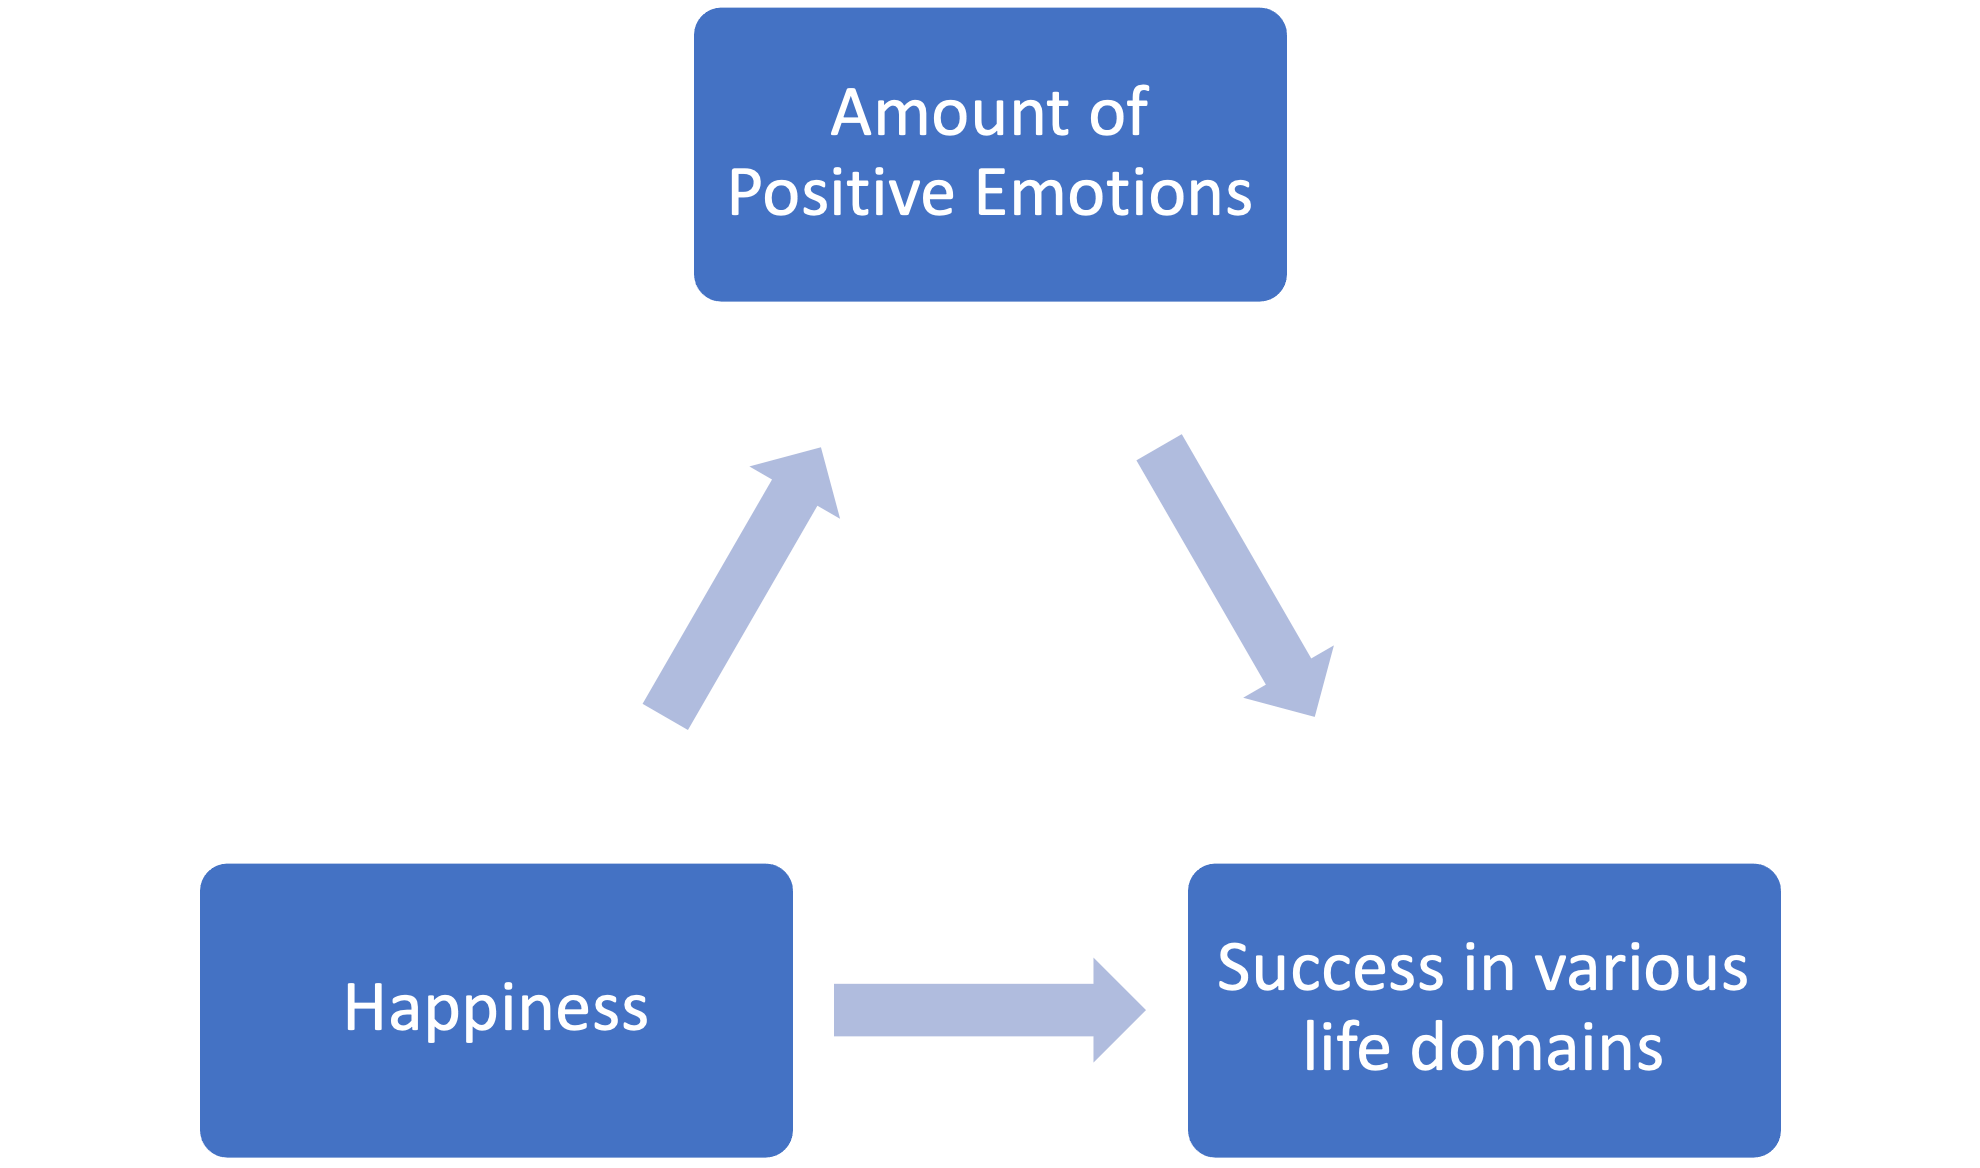 A triangle flowchart of text relating amount of positive emotions, happiness, and success in various life fomains.